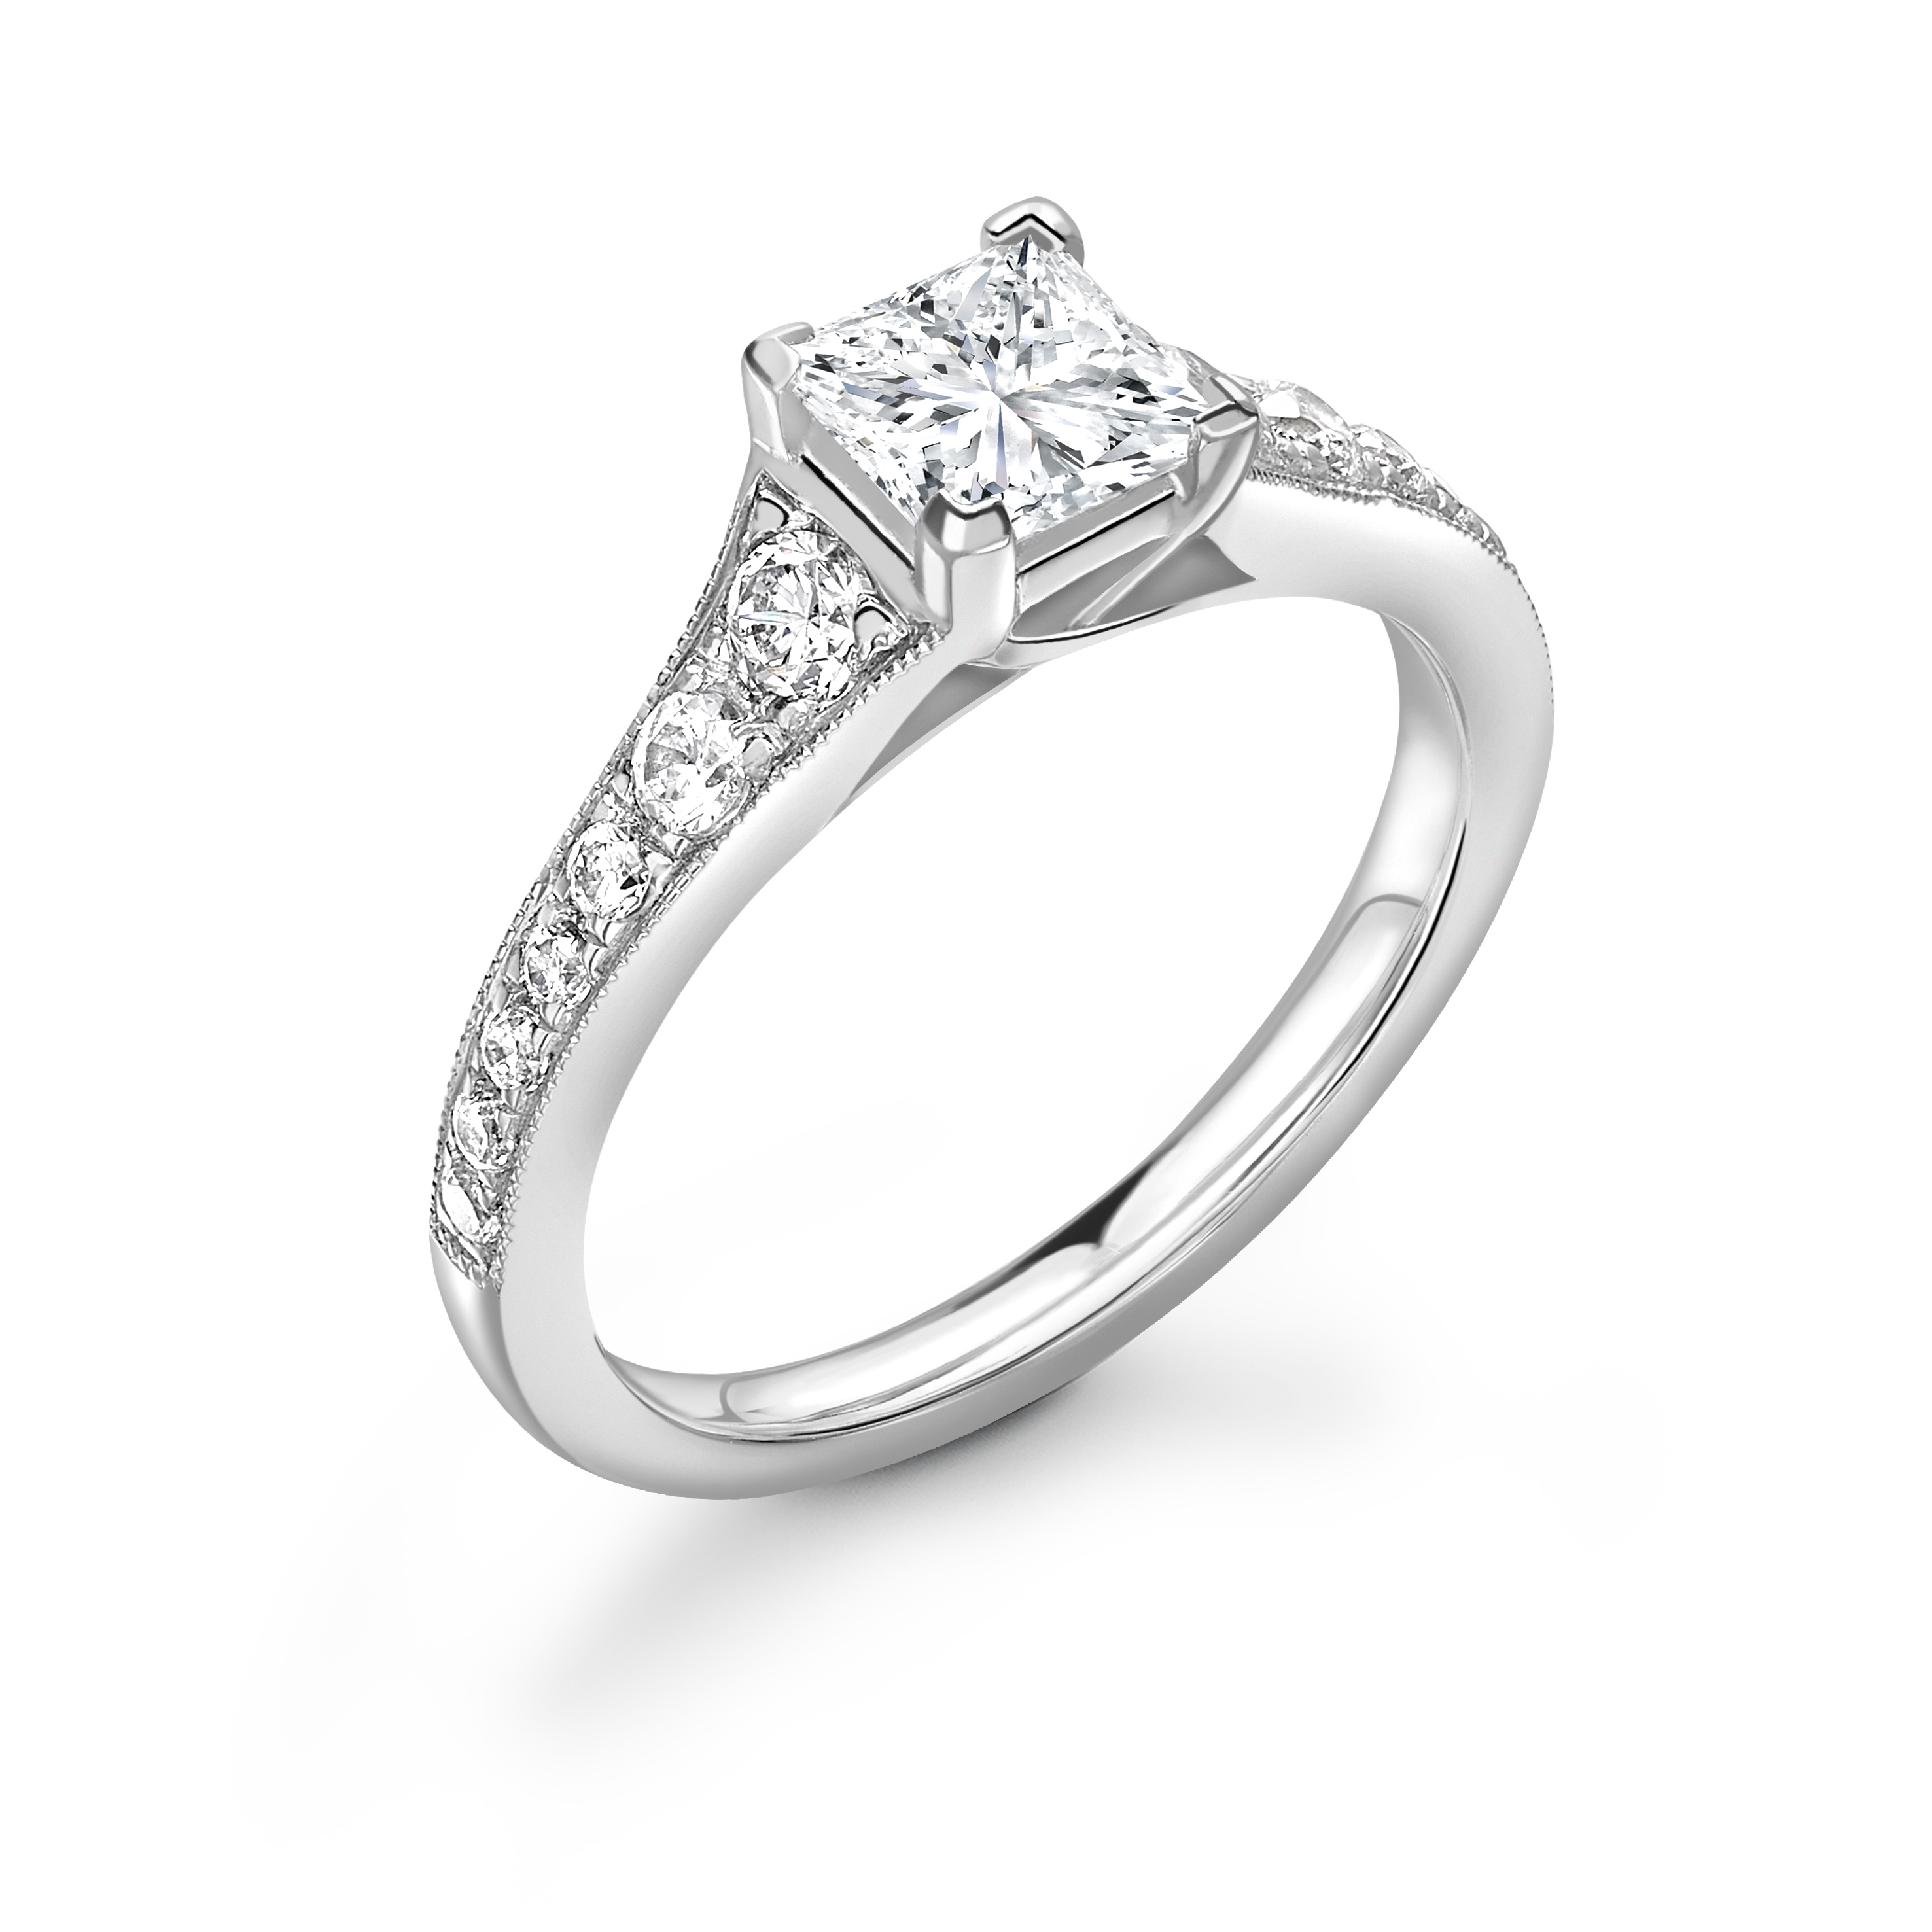 Tapering Up Shoulder Princess Diamond Engagement Ring in Gold and Platinum